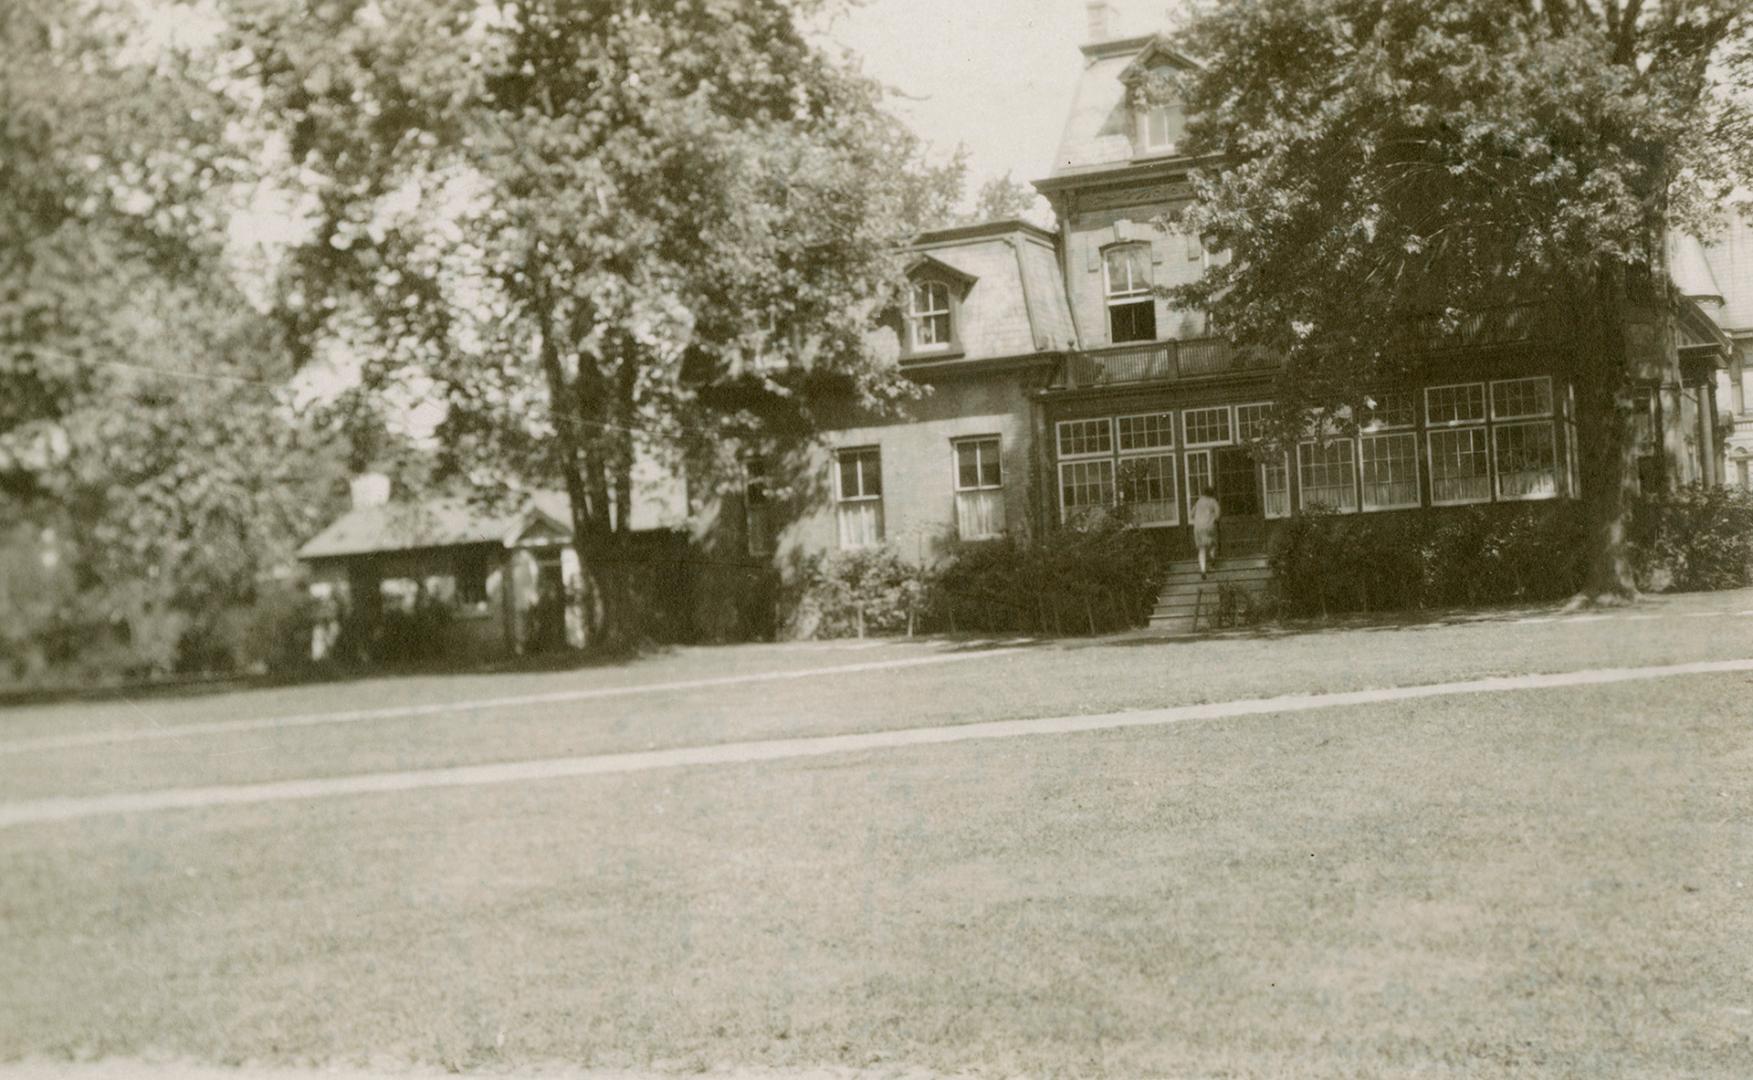 Photo taken from some distance with large lawn in front and large Victorian House surrounded by ...